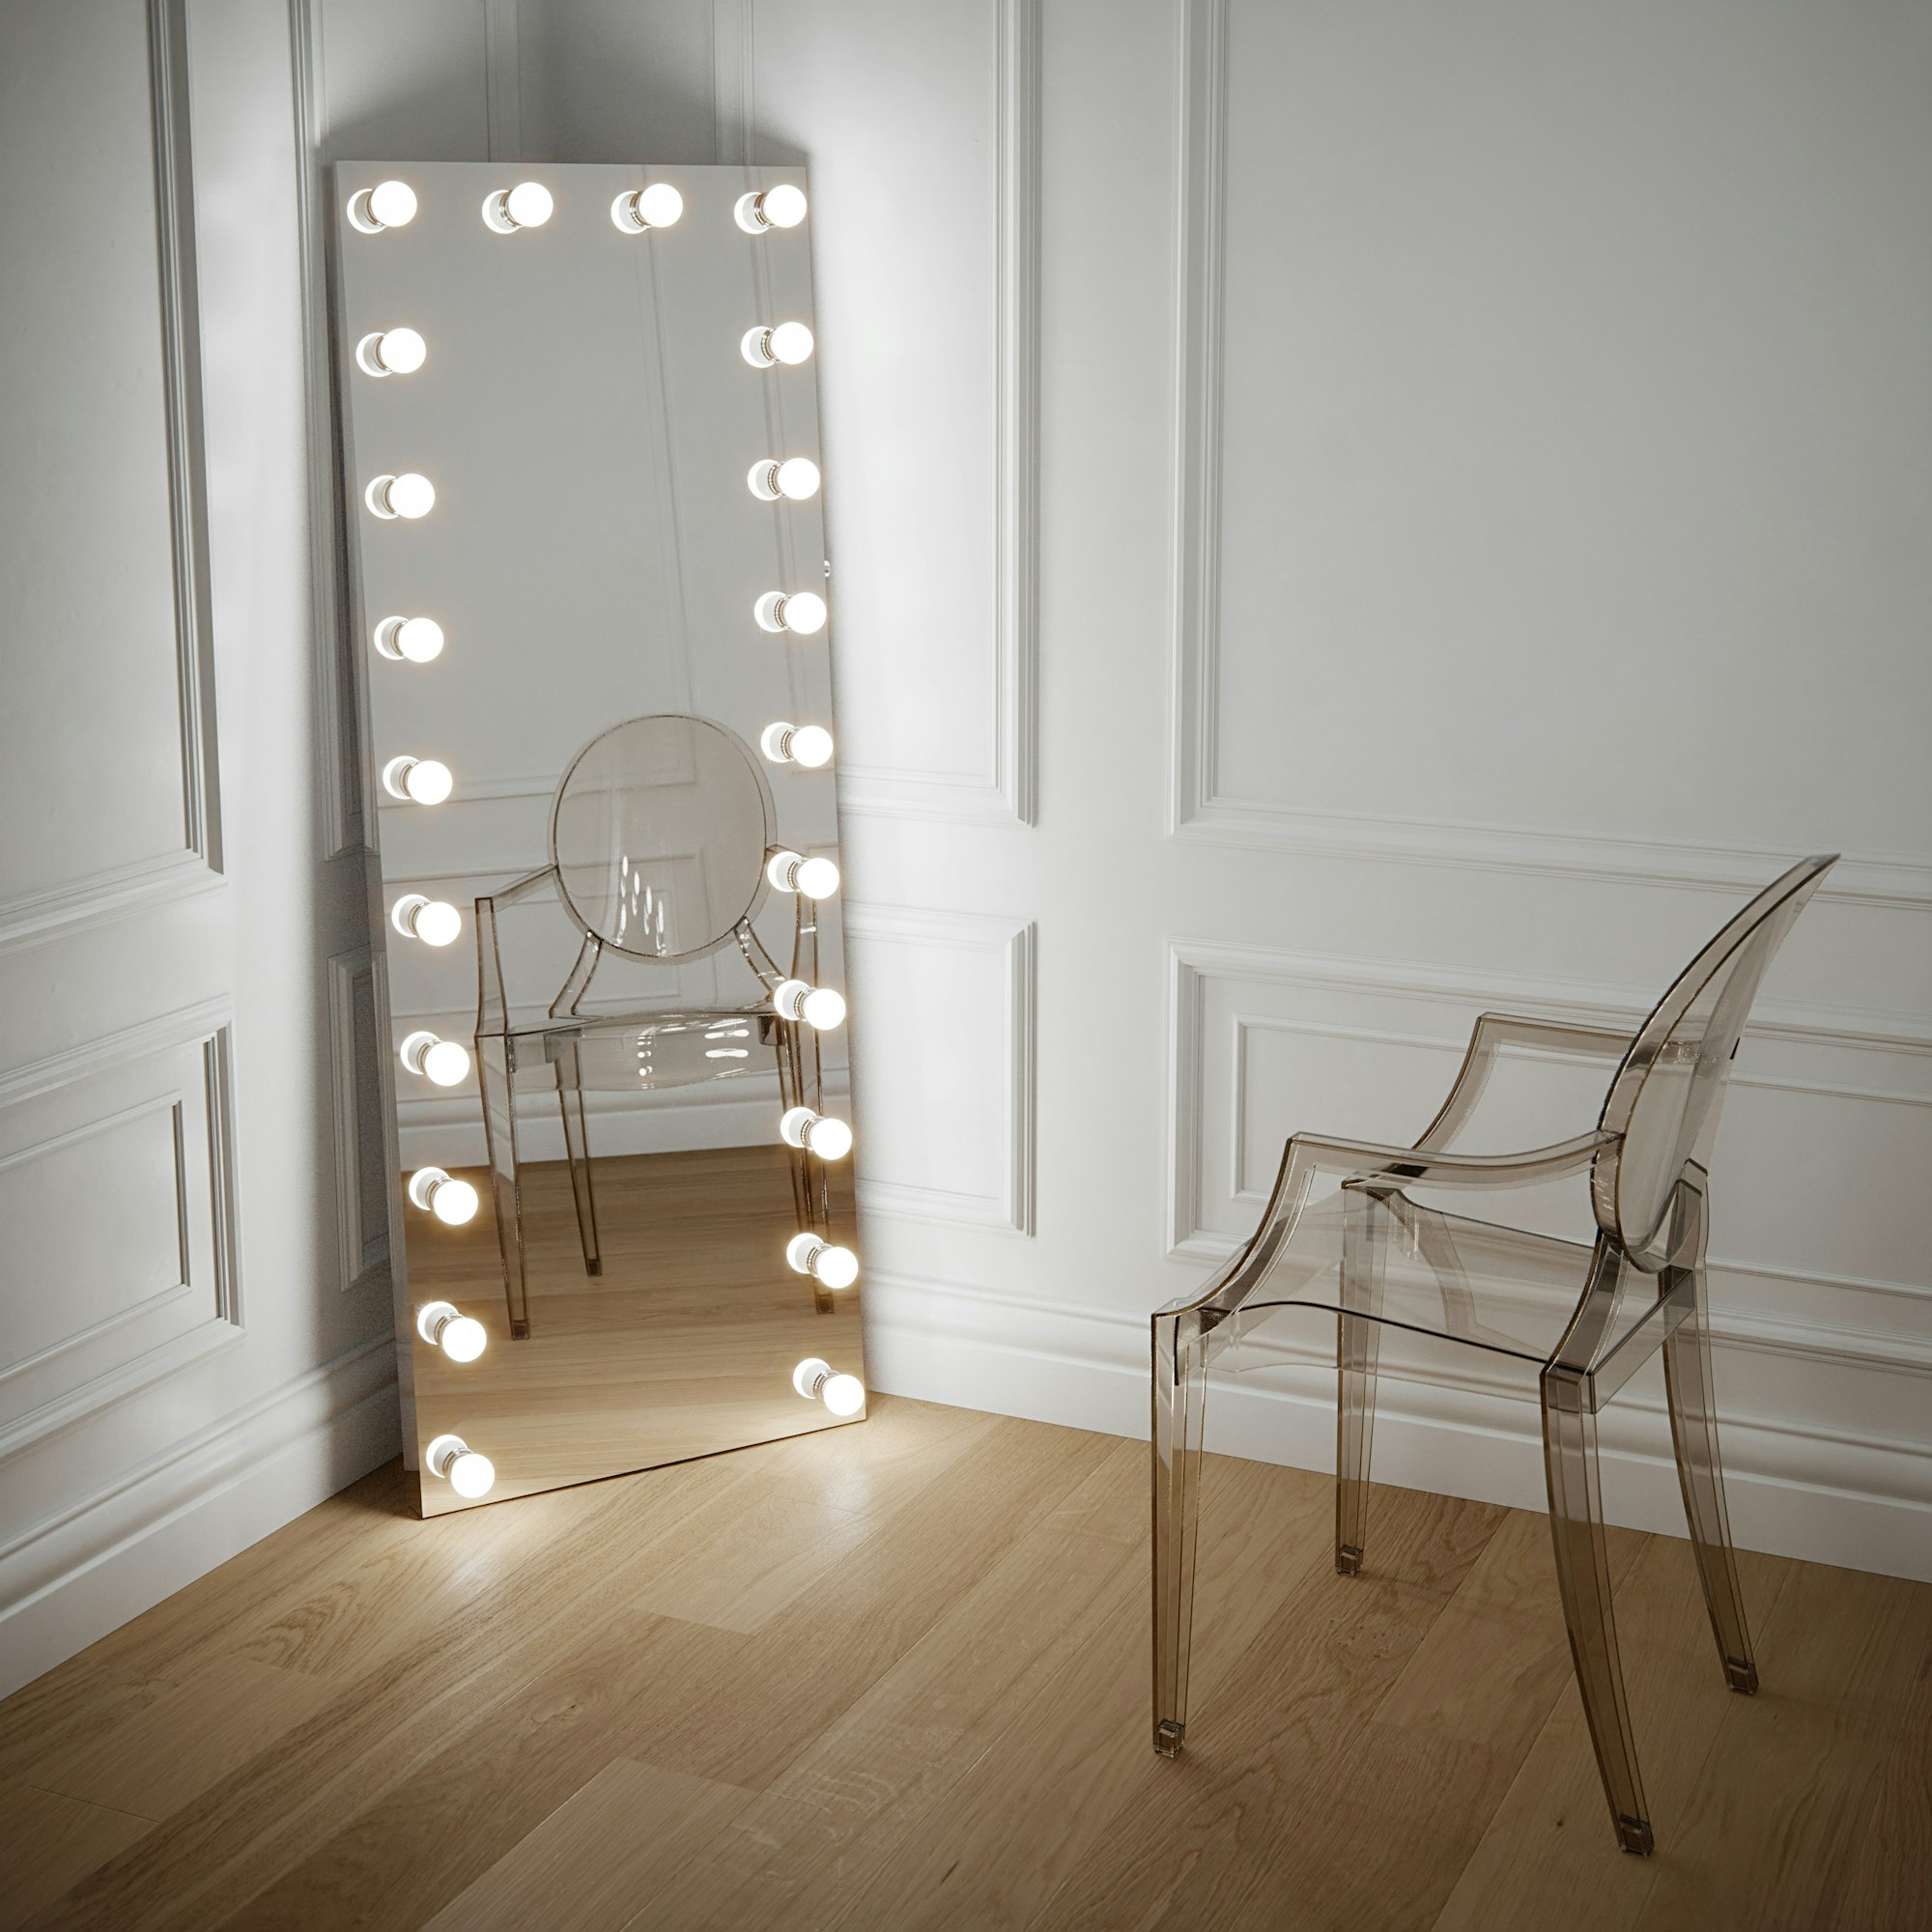 Full length mirror Hollywood style with led bulbs.

Leaner mirror against a white panelled wall and crystal Kartell Louis ghost chair by Philippe Starck